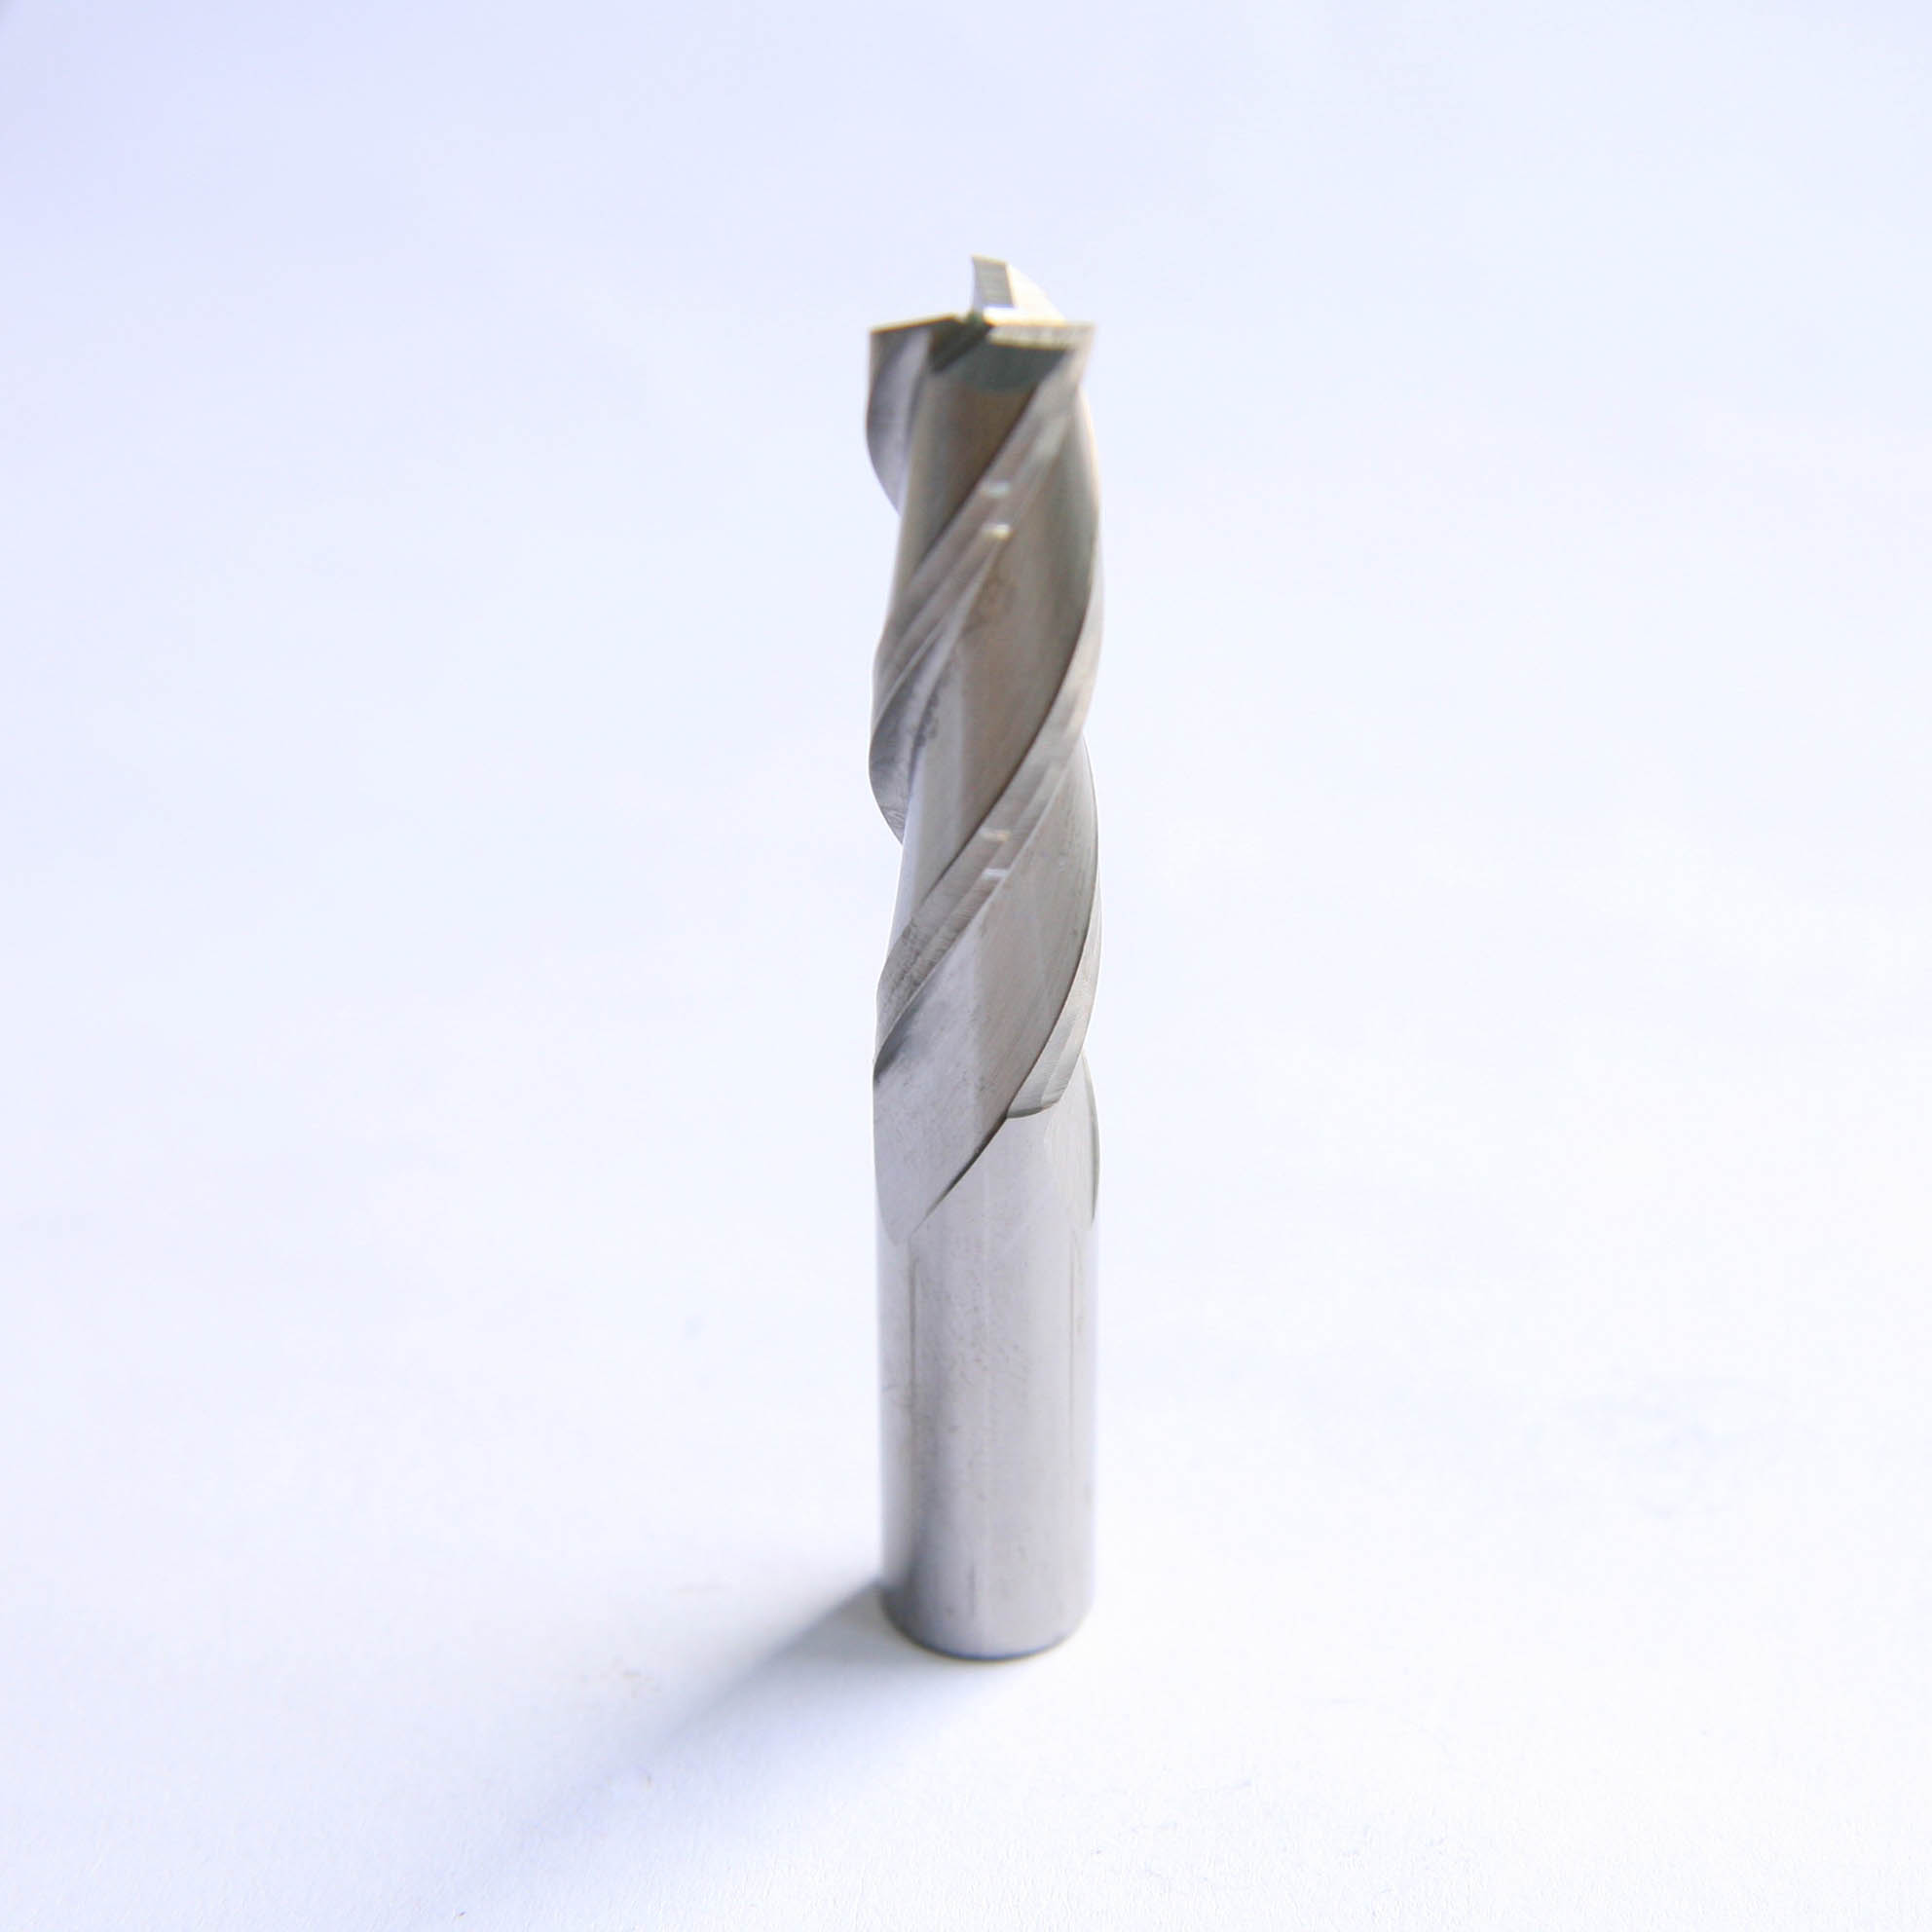 3 FLUTE 45°HELICAL END MILLS 